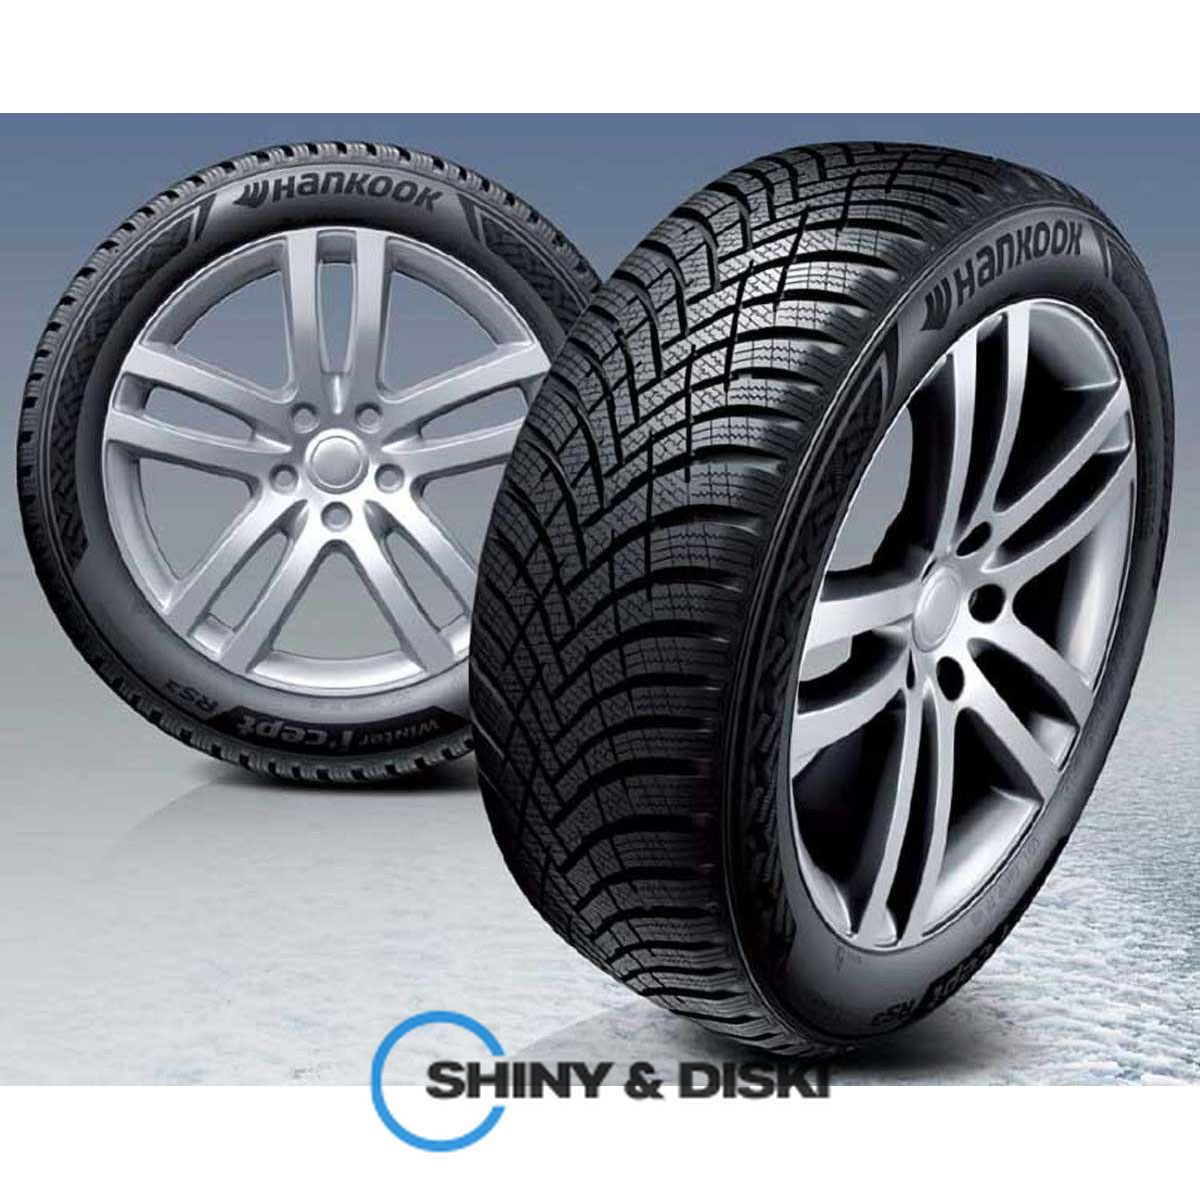 покрышки hankook winter i*cept rs3 w462 205/45 r16 87h